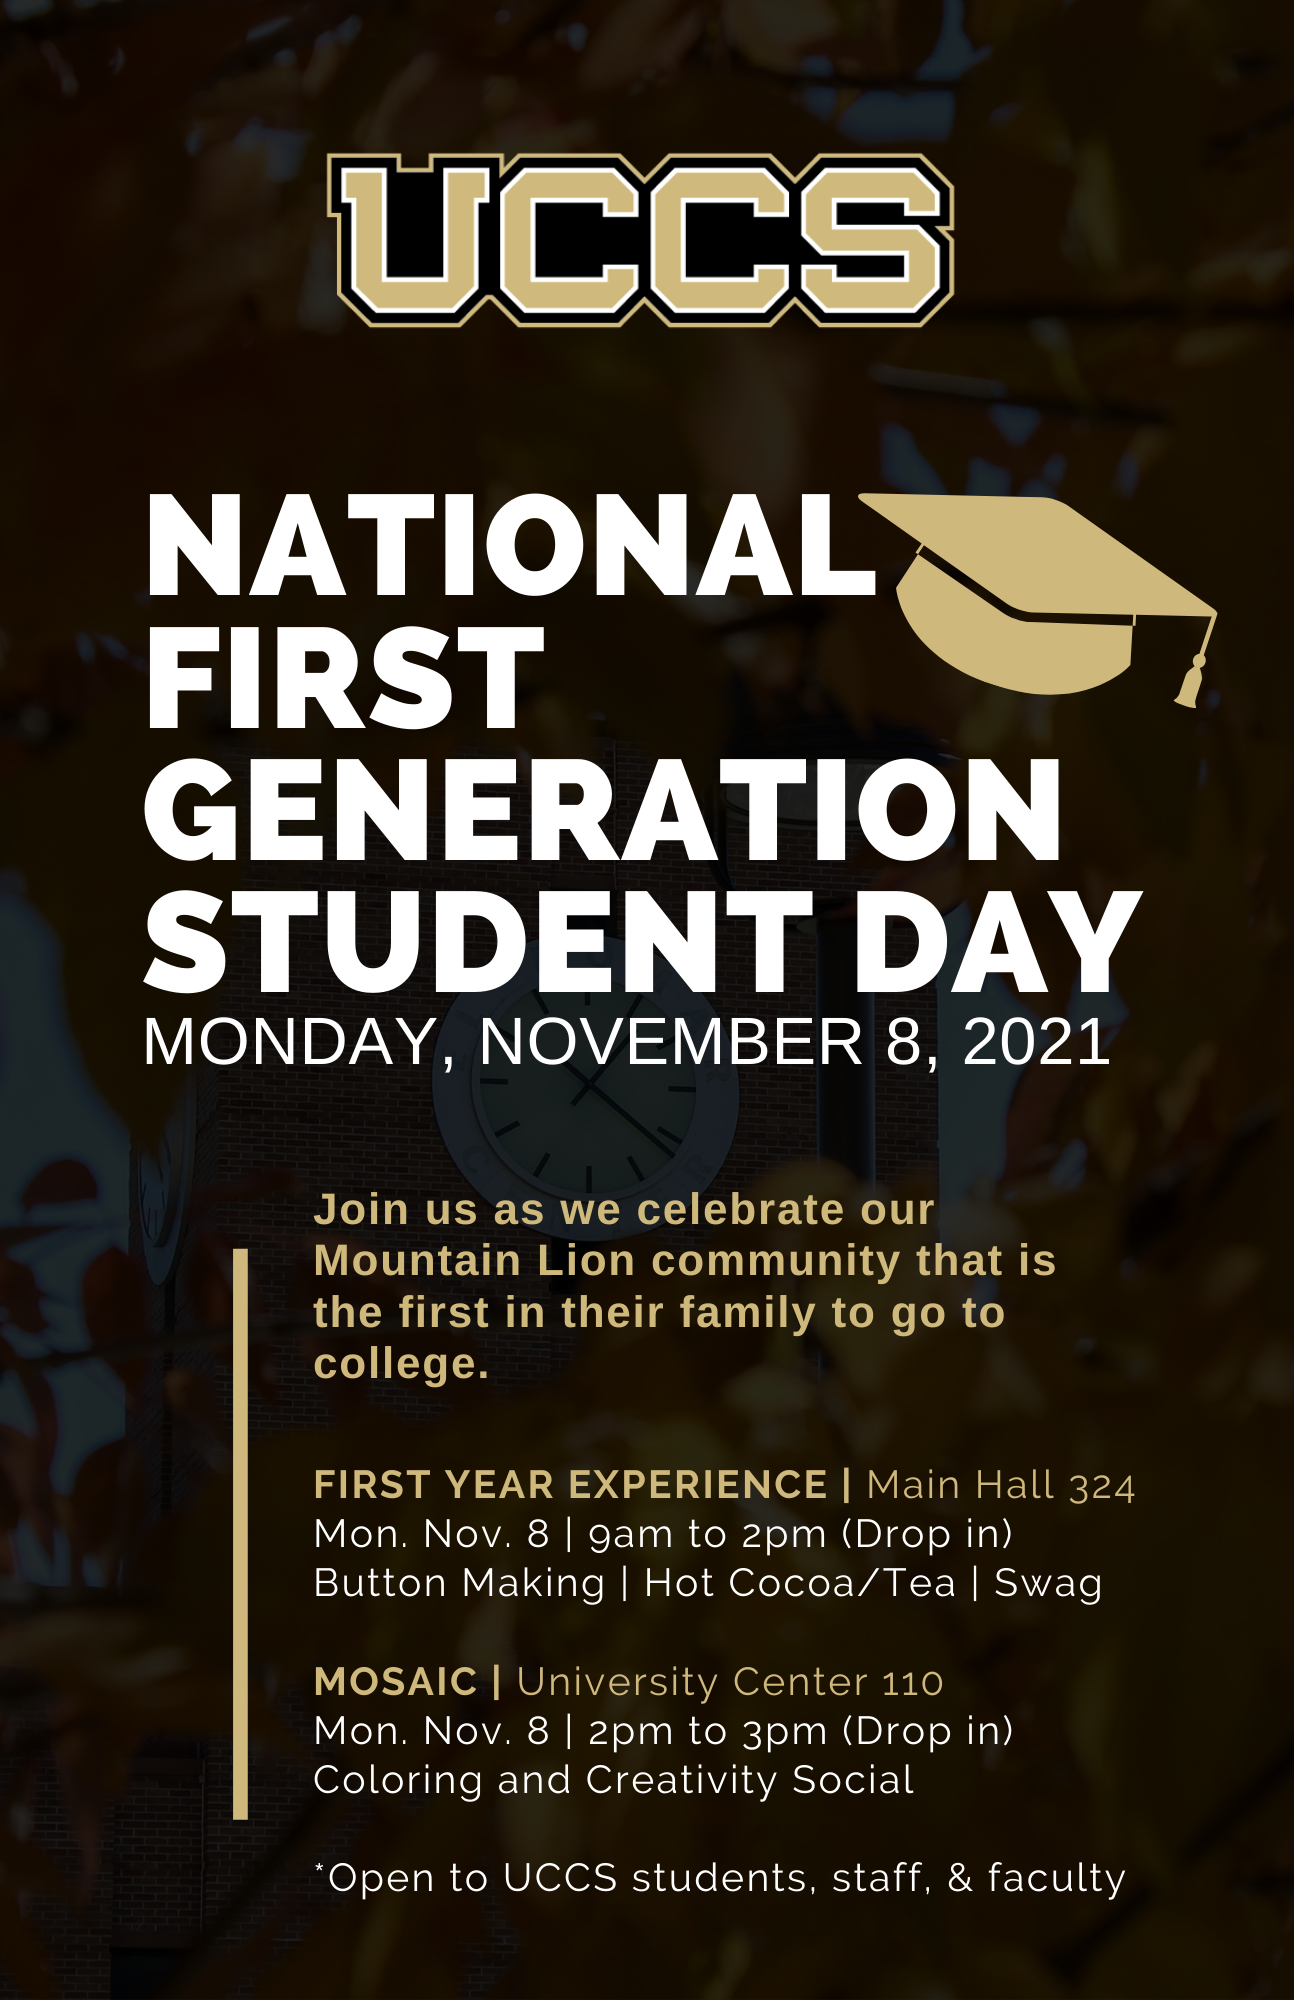 National First Generation Student Day. November 8, 2021. Visit First Year Experience (Main Hall 324) anytime between 9am and 2pm for button making, hot cocoa/tea, and UCCS Swag. Join MOSAIC (University Center 110) for Coloring and creativity social from 2pm to 3pm.